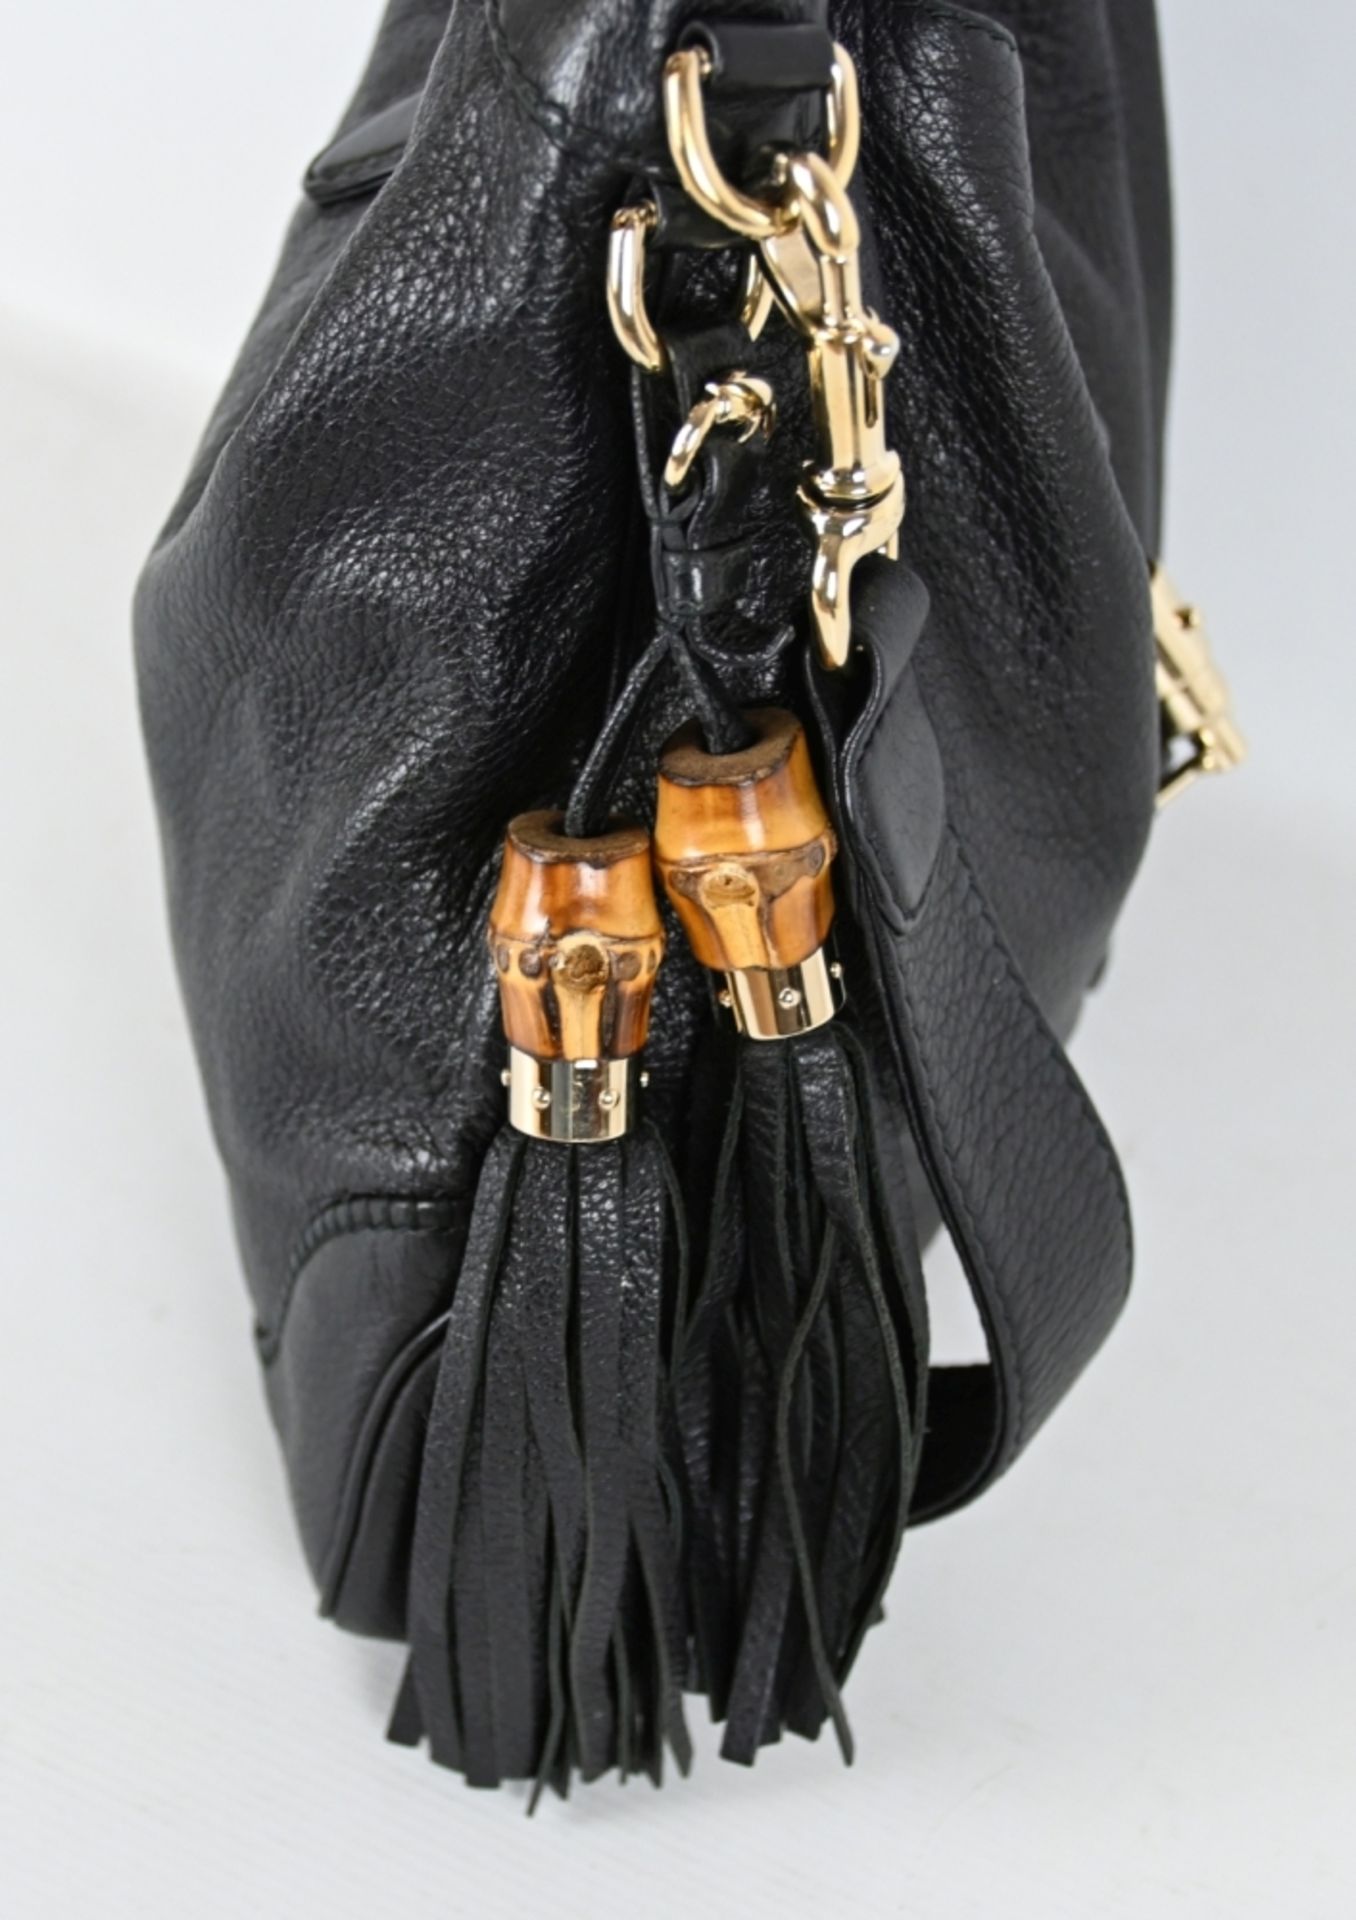 TASCHE GUCCI - Image 4 of 6